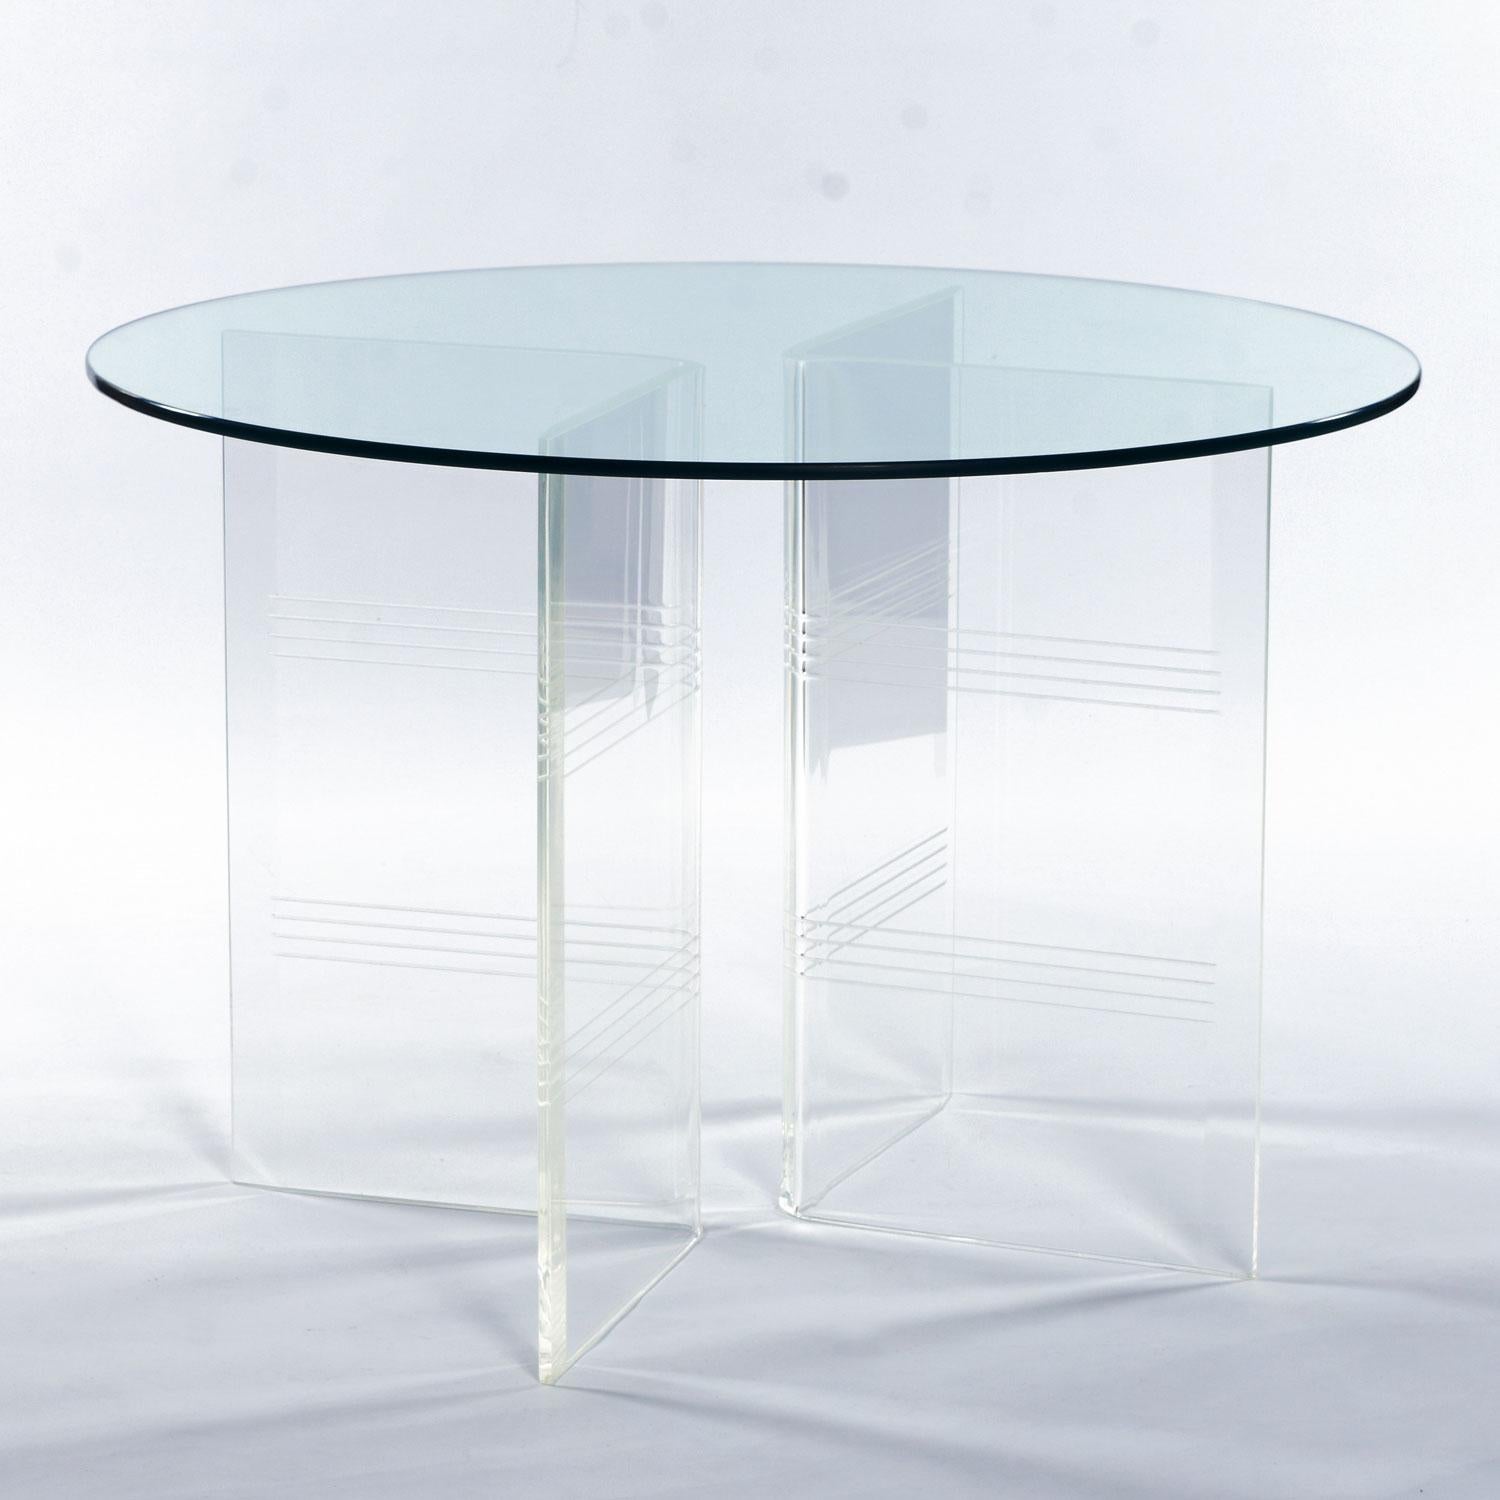 A brand new 48? diameter, 3/8? thick tempered glass top will ship with the table when purchased online. Let us know if you prefer to buy the bases alone, without glass. This listing is for the table alone. The chairs in the photos are NOT included